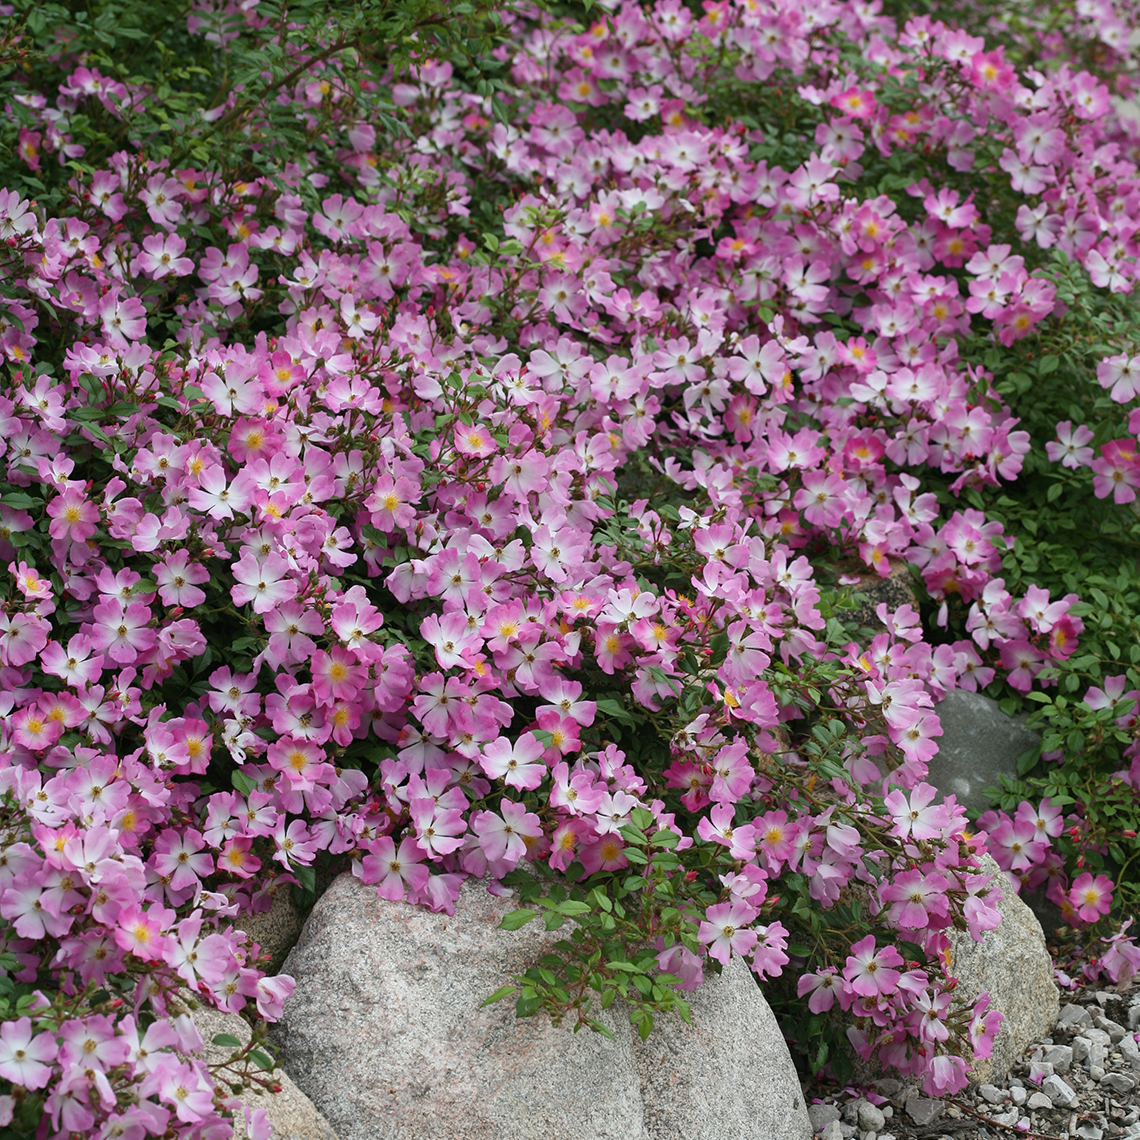 Oso Easy Fragrant Spreader Rose blooming next to rock border